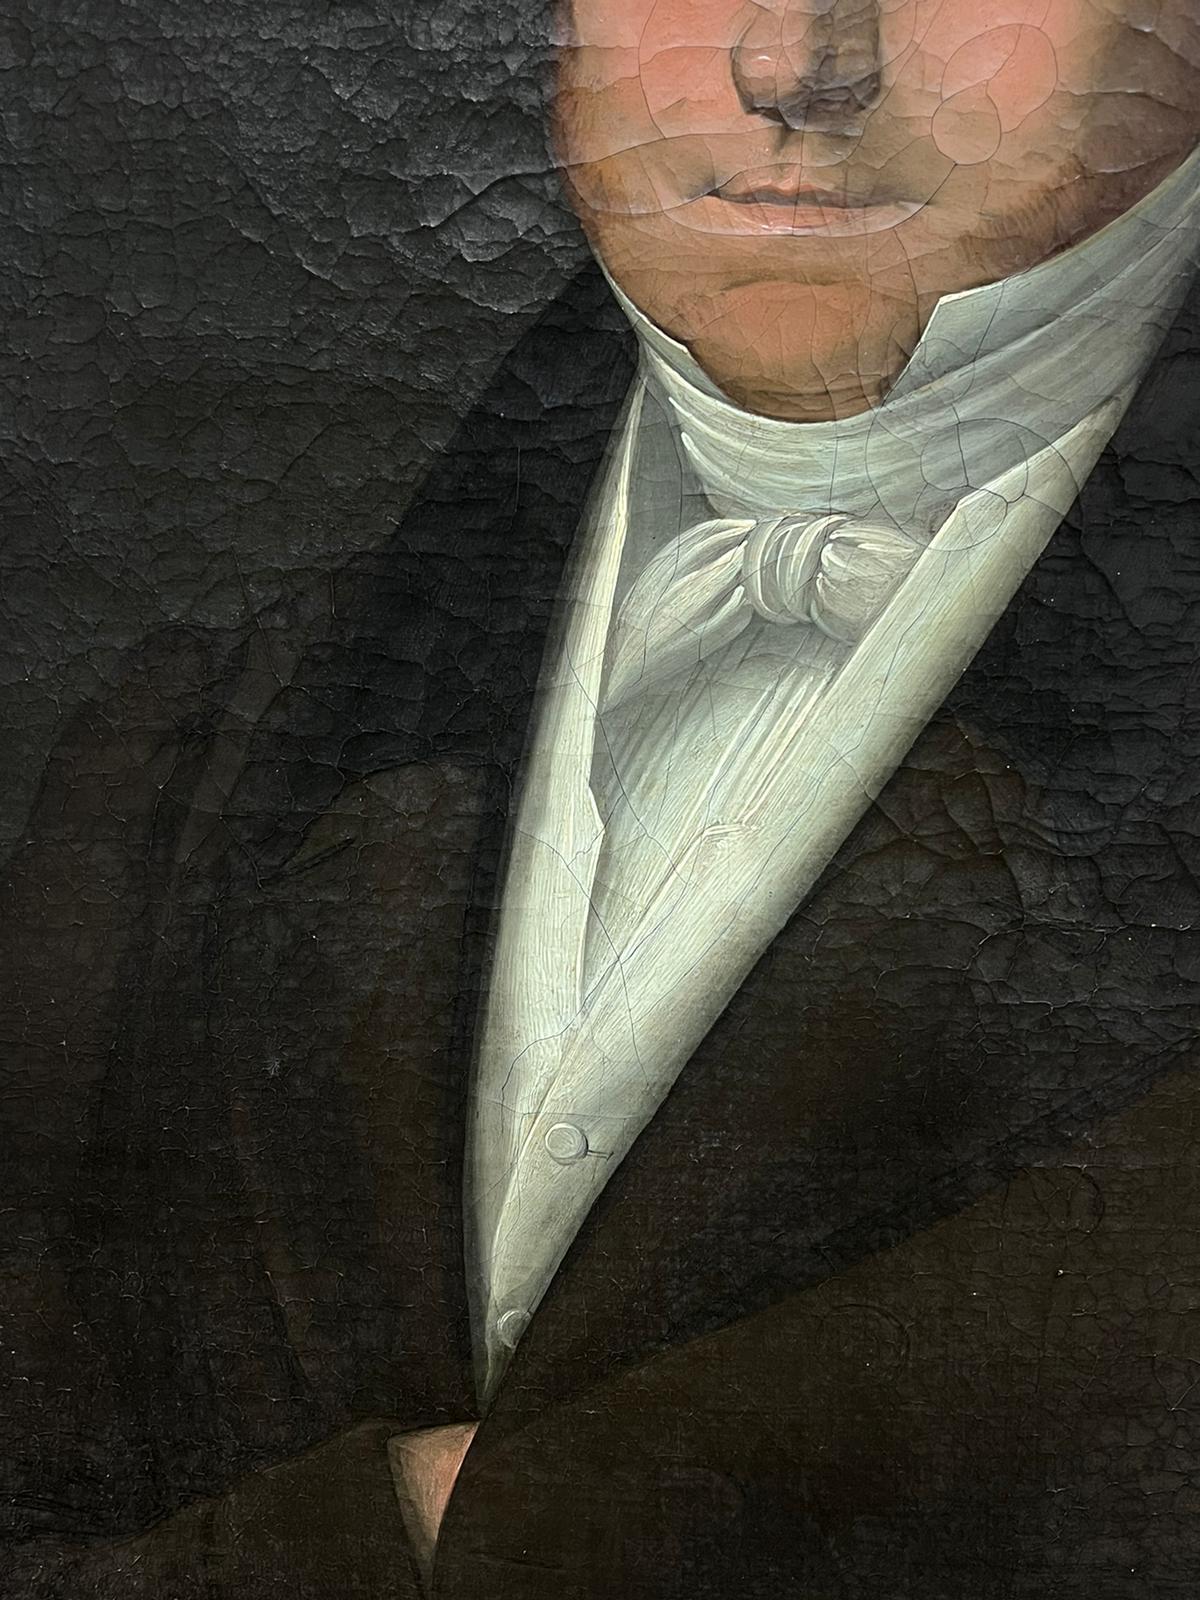 Portrait of a French Gentleman, circa 1800's
French artist, Empire period
oil on canvas, unframed
canvas: 29.5 x 25 inches
provenance: private collection, France
condition: a few minor scuffs and crinkles to the canvas, but overall good and sound